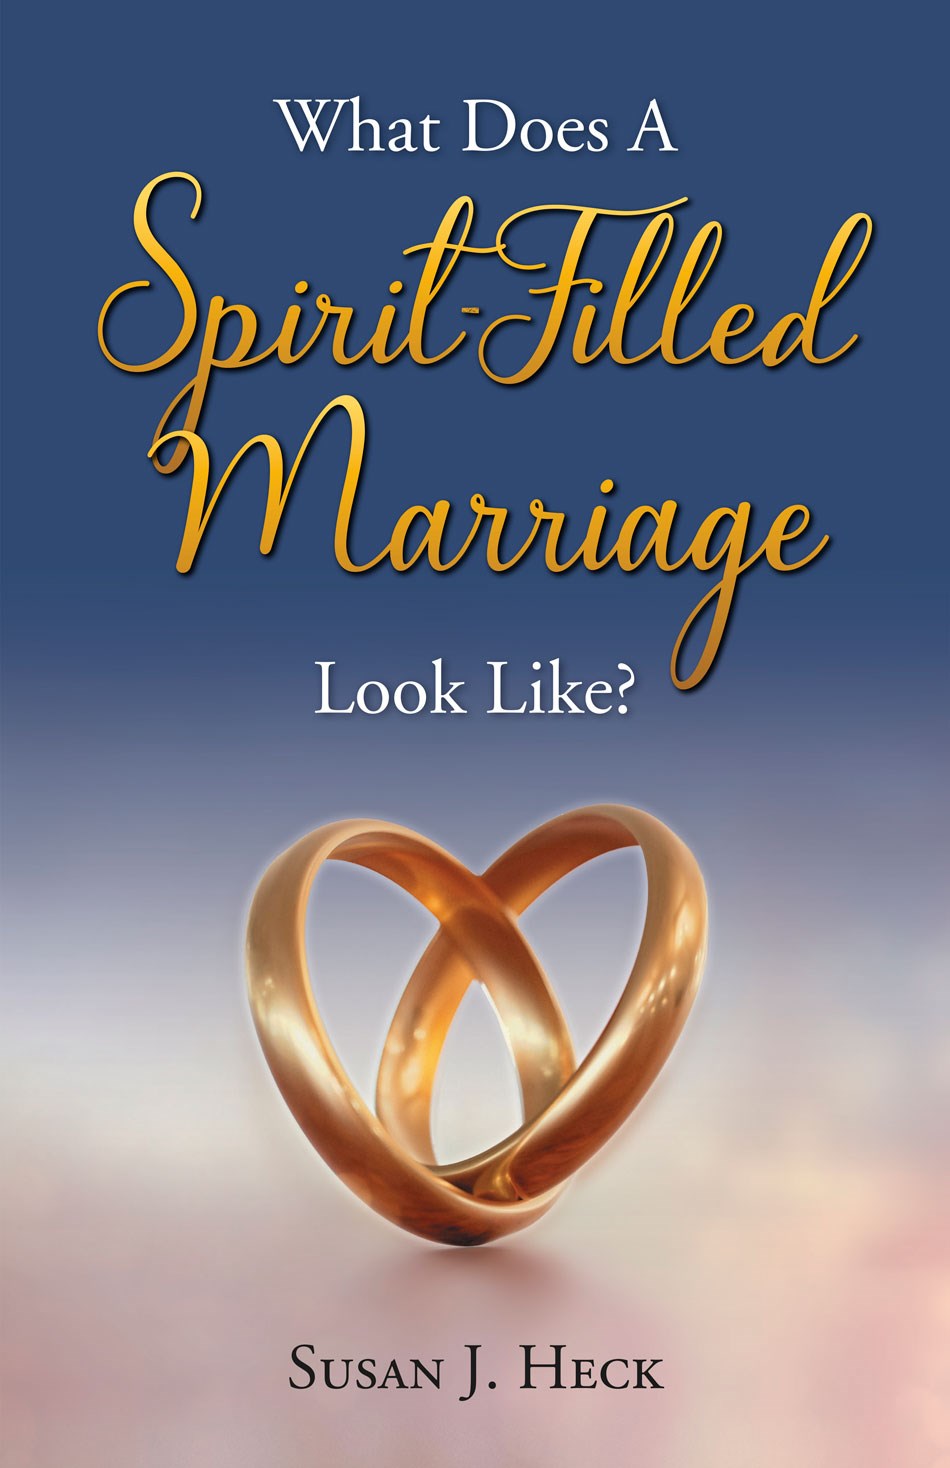 What Does a Spirit-Filled Marriage Look Like?